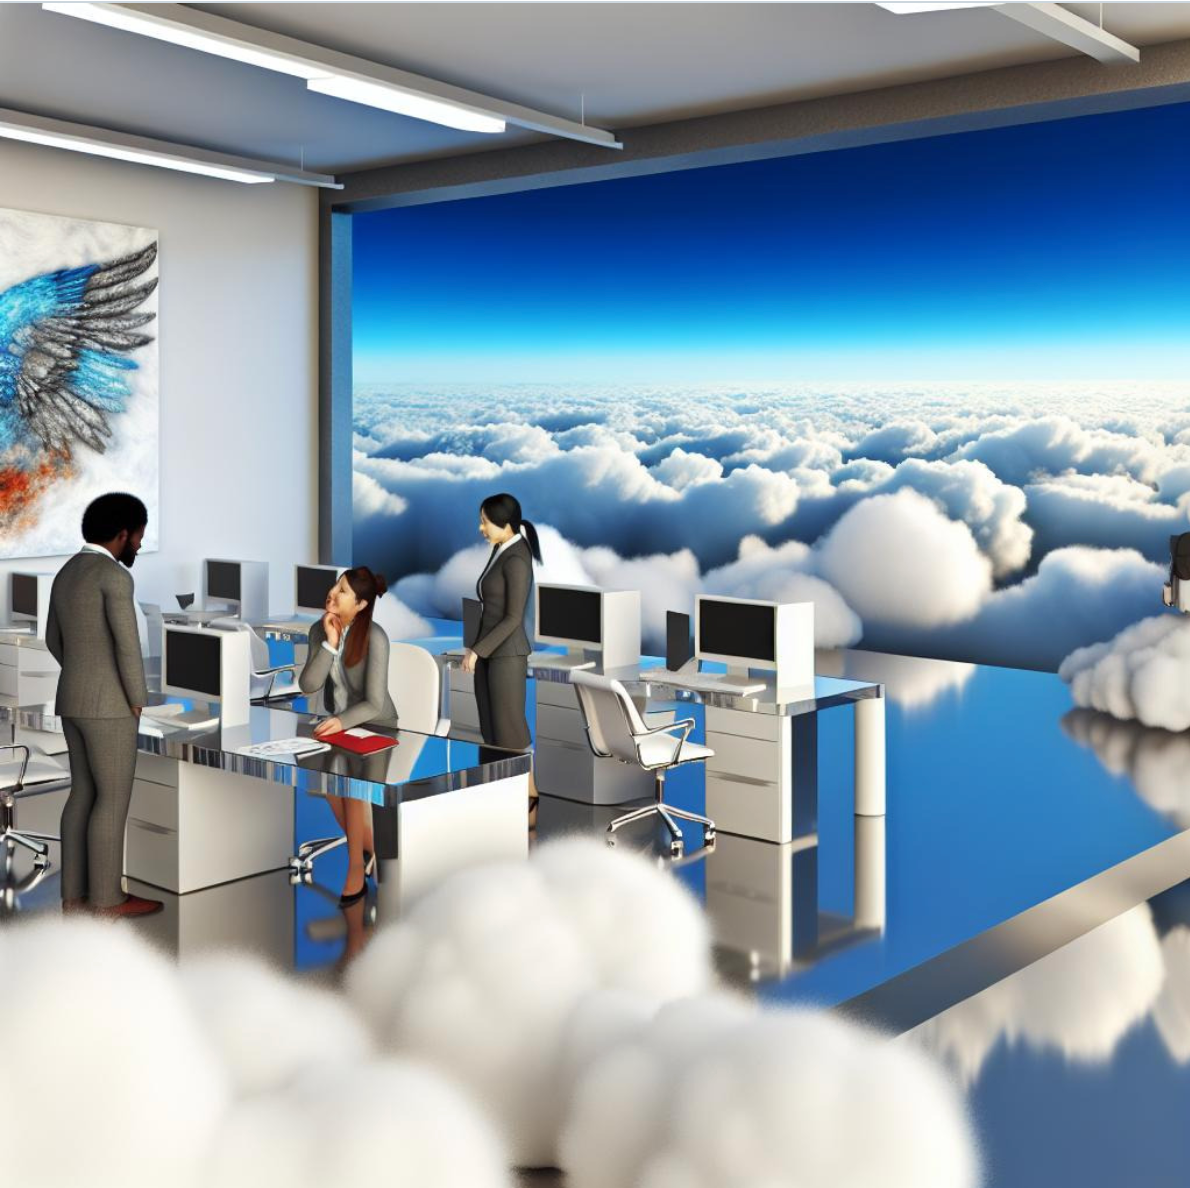 94% of businesses worldwide rely on some form of cloud computing or storage